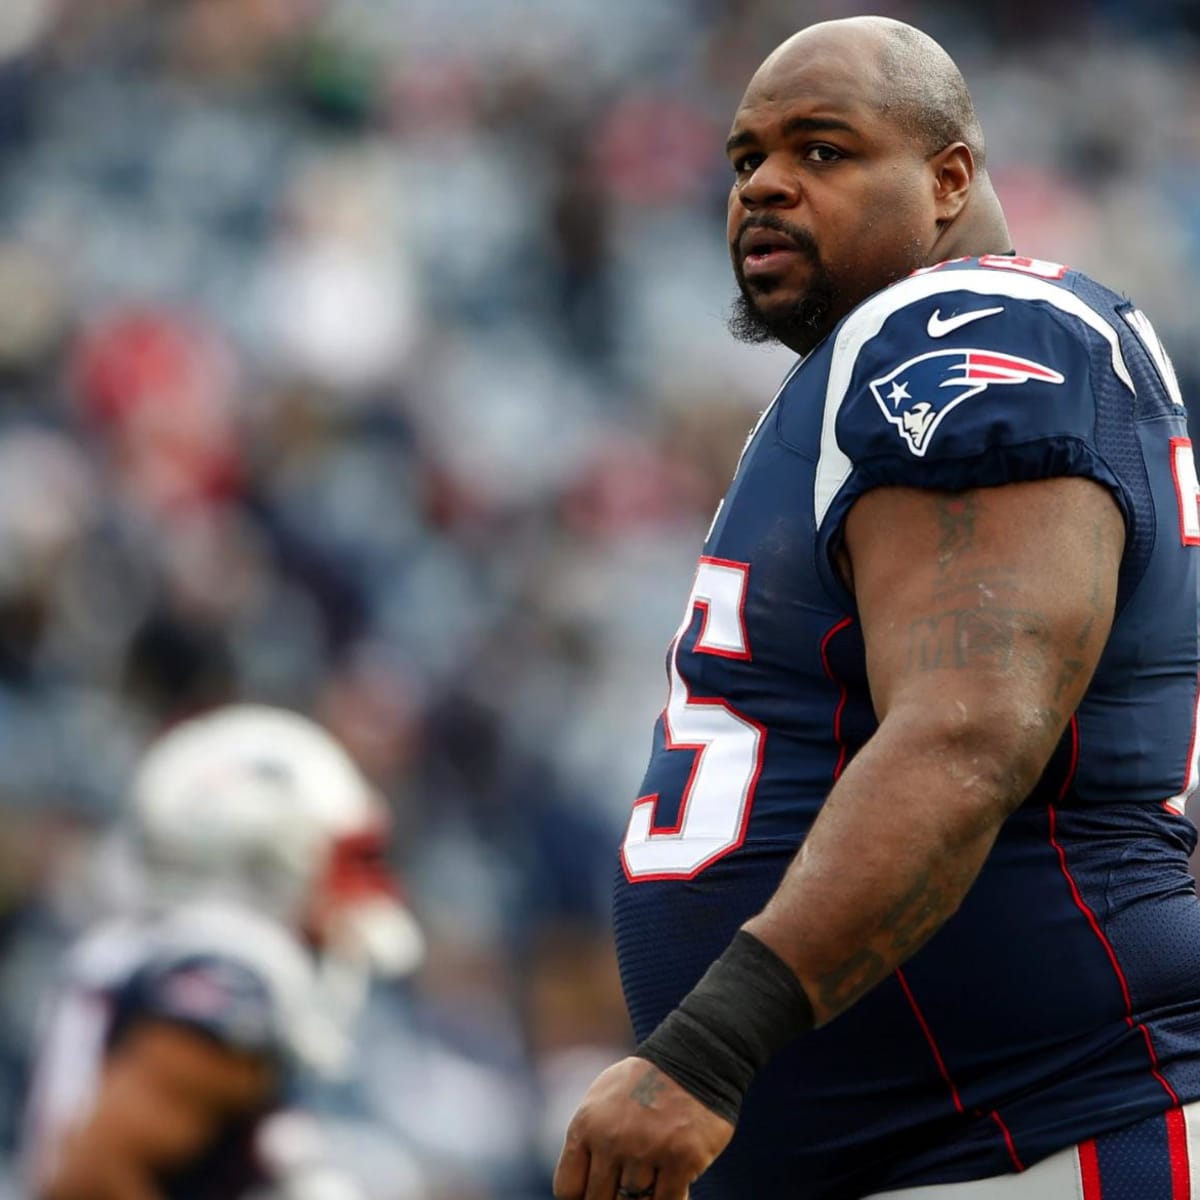 Vince Wilfork calls out 'entitled' young players who don't respect